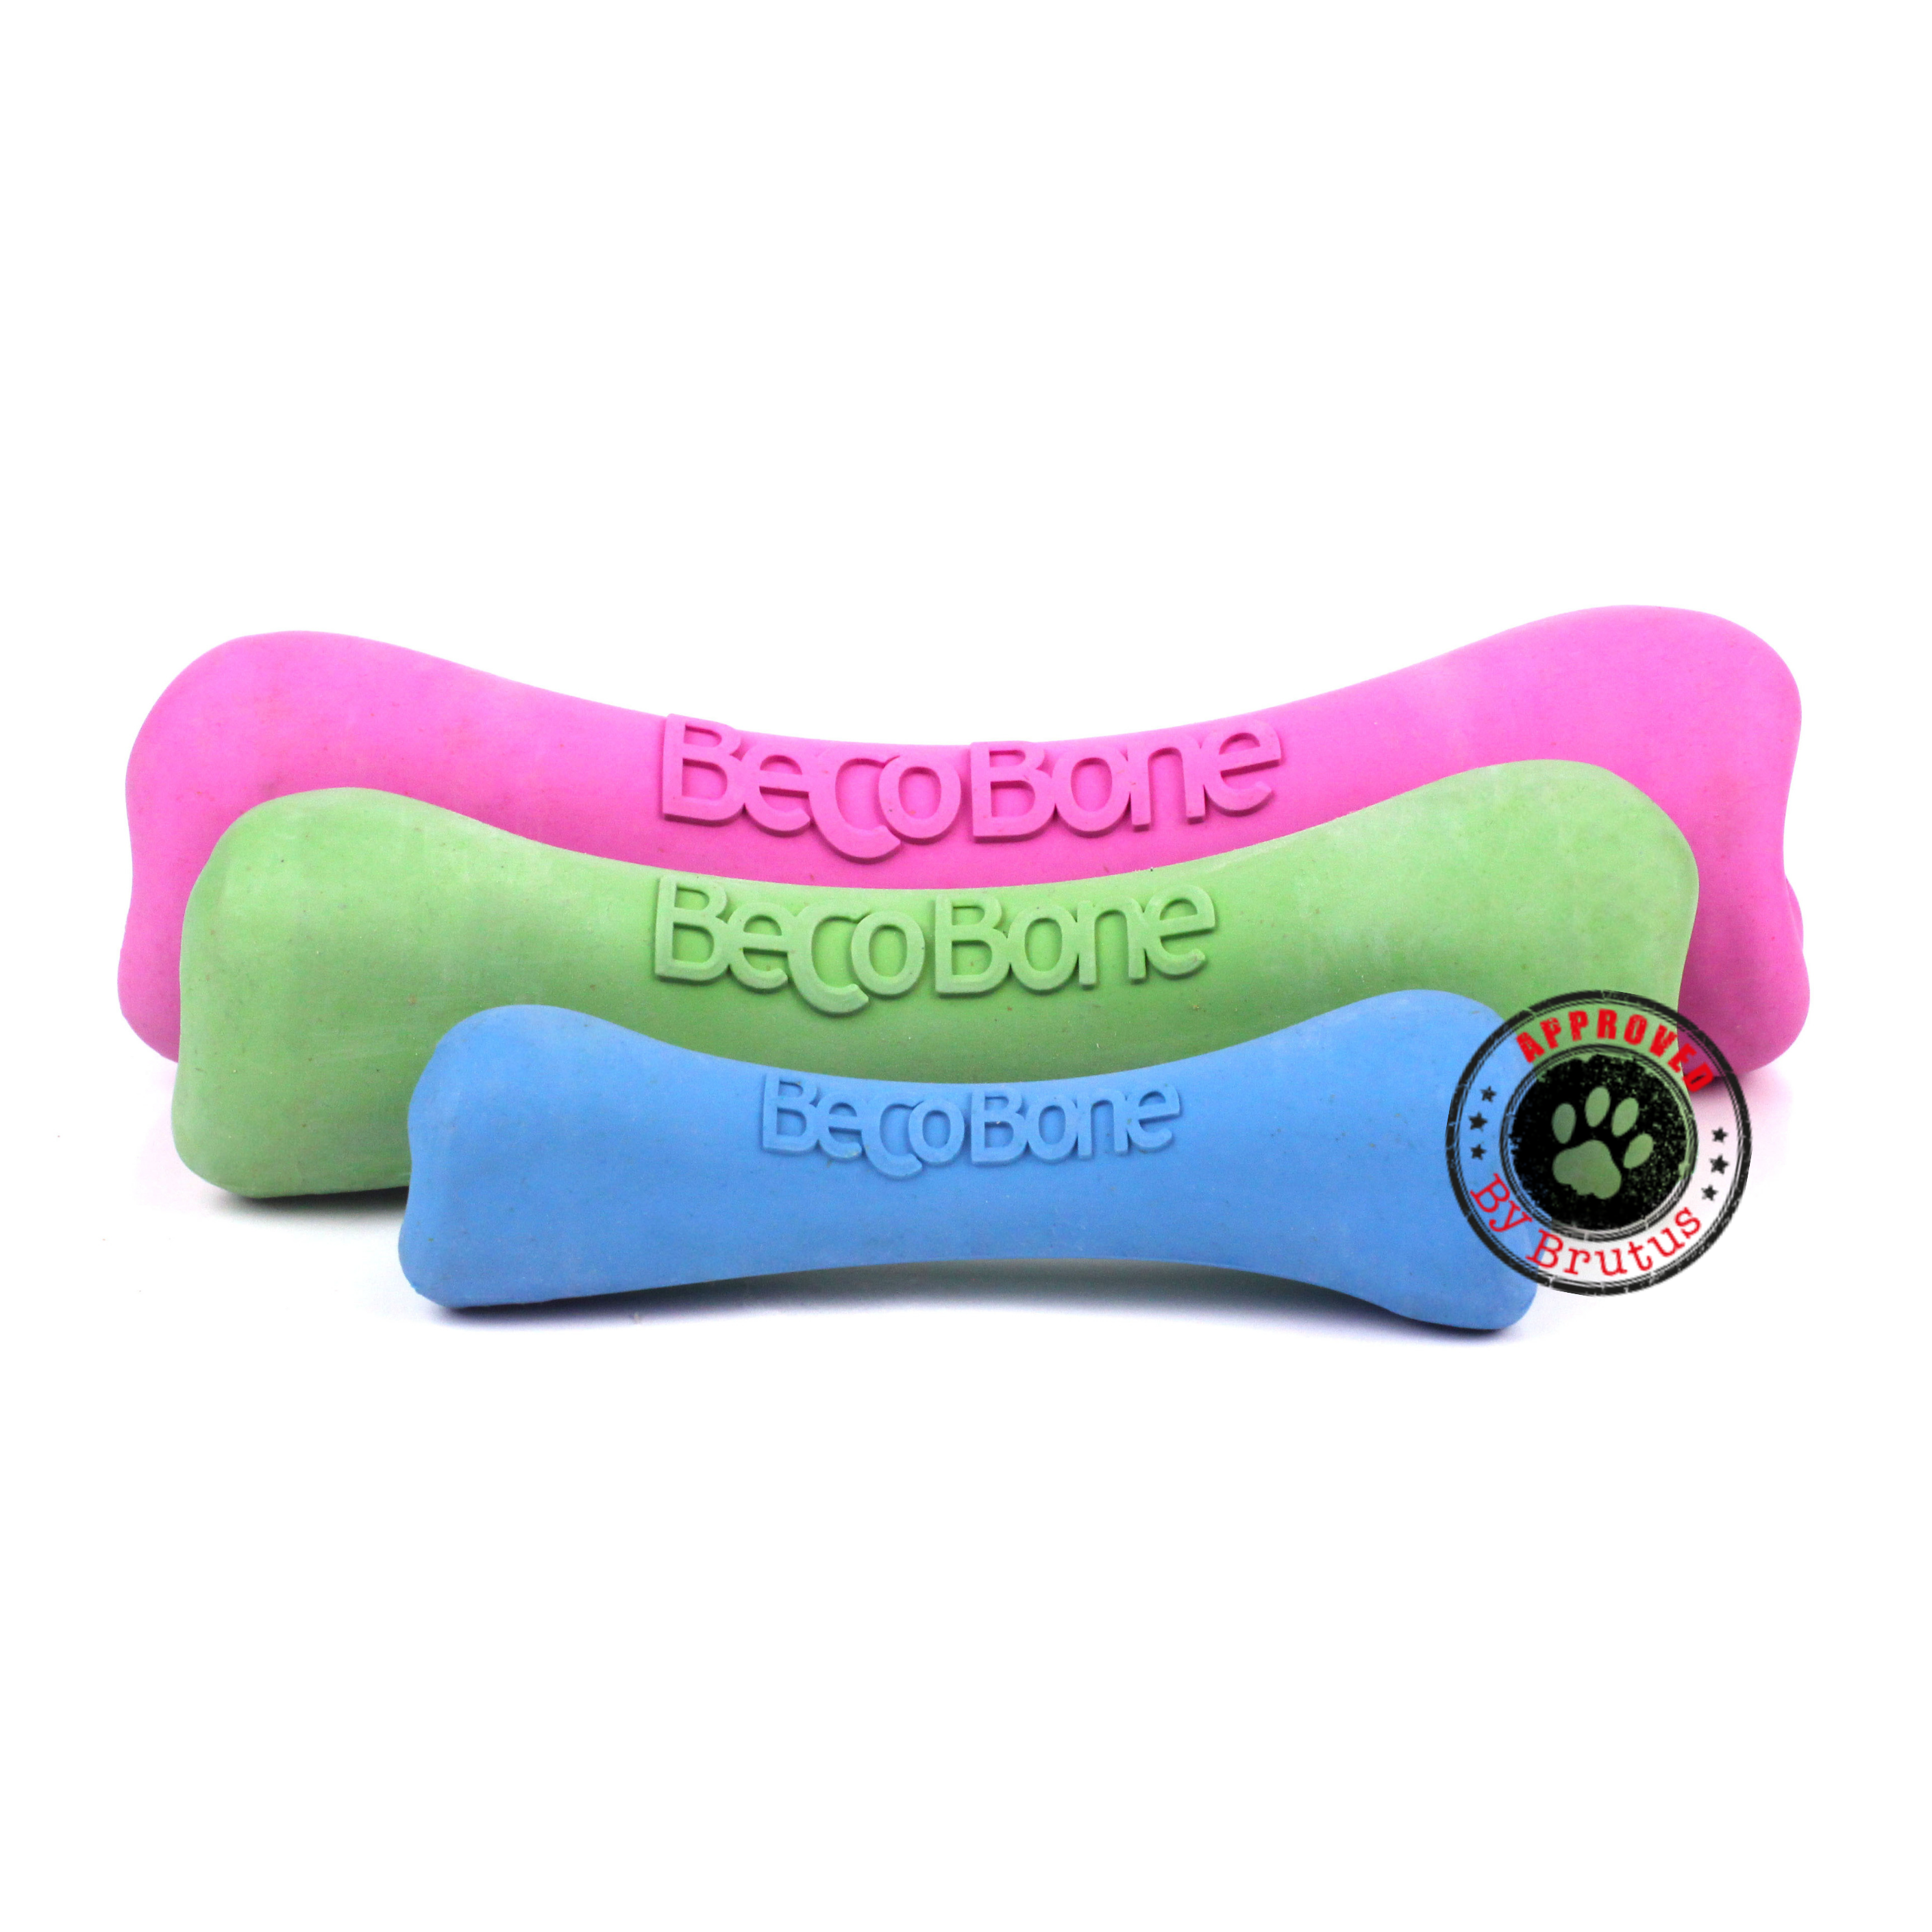 Beco Bone by Beco Pets; treat toy for dogs and puppies